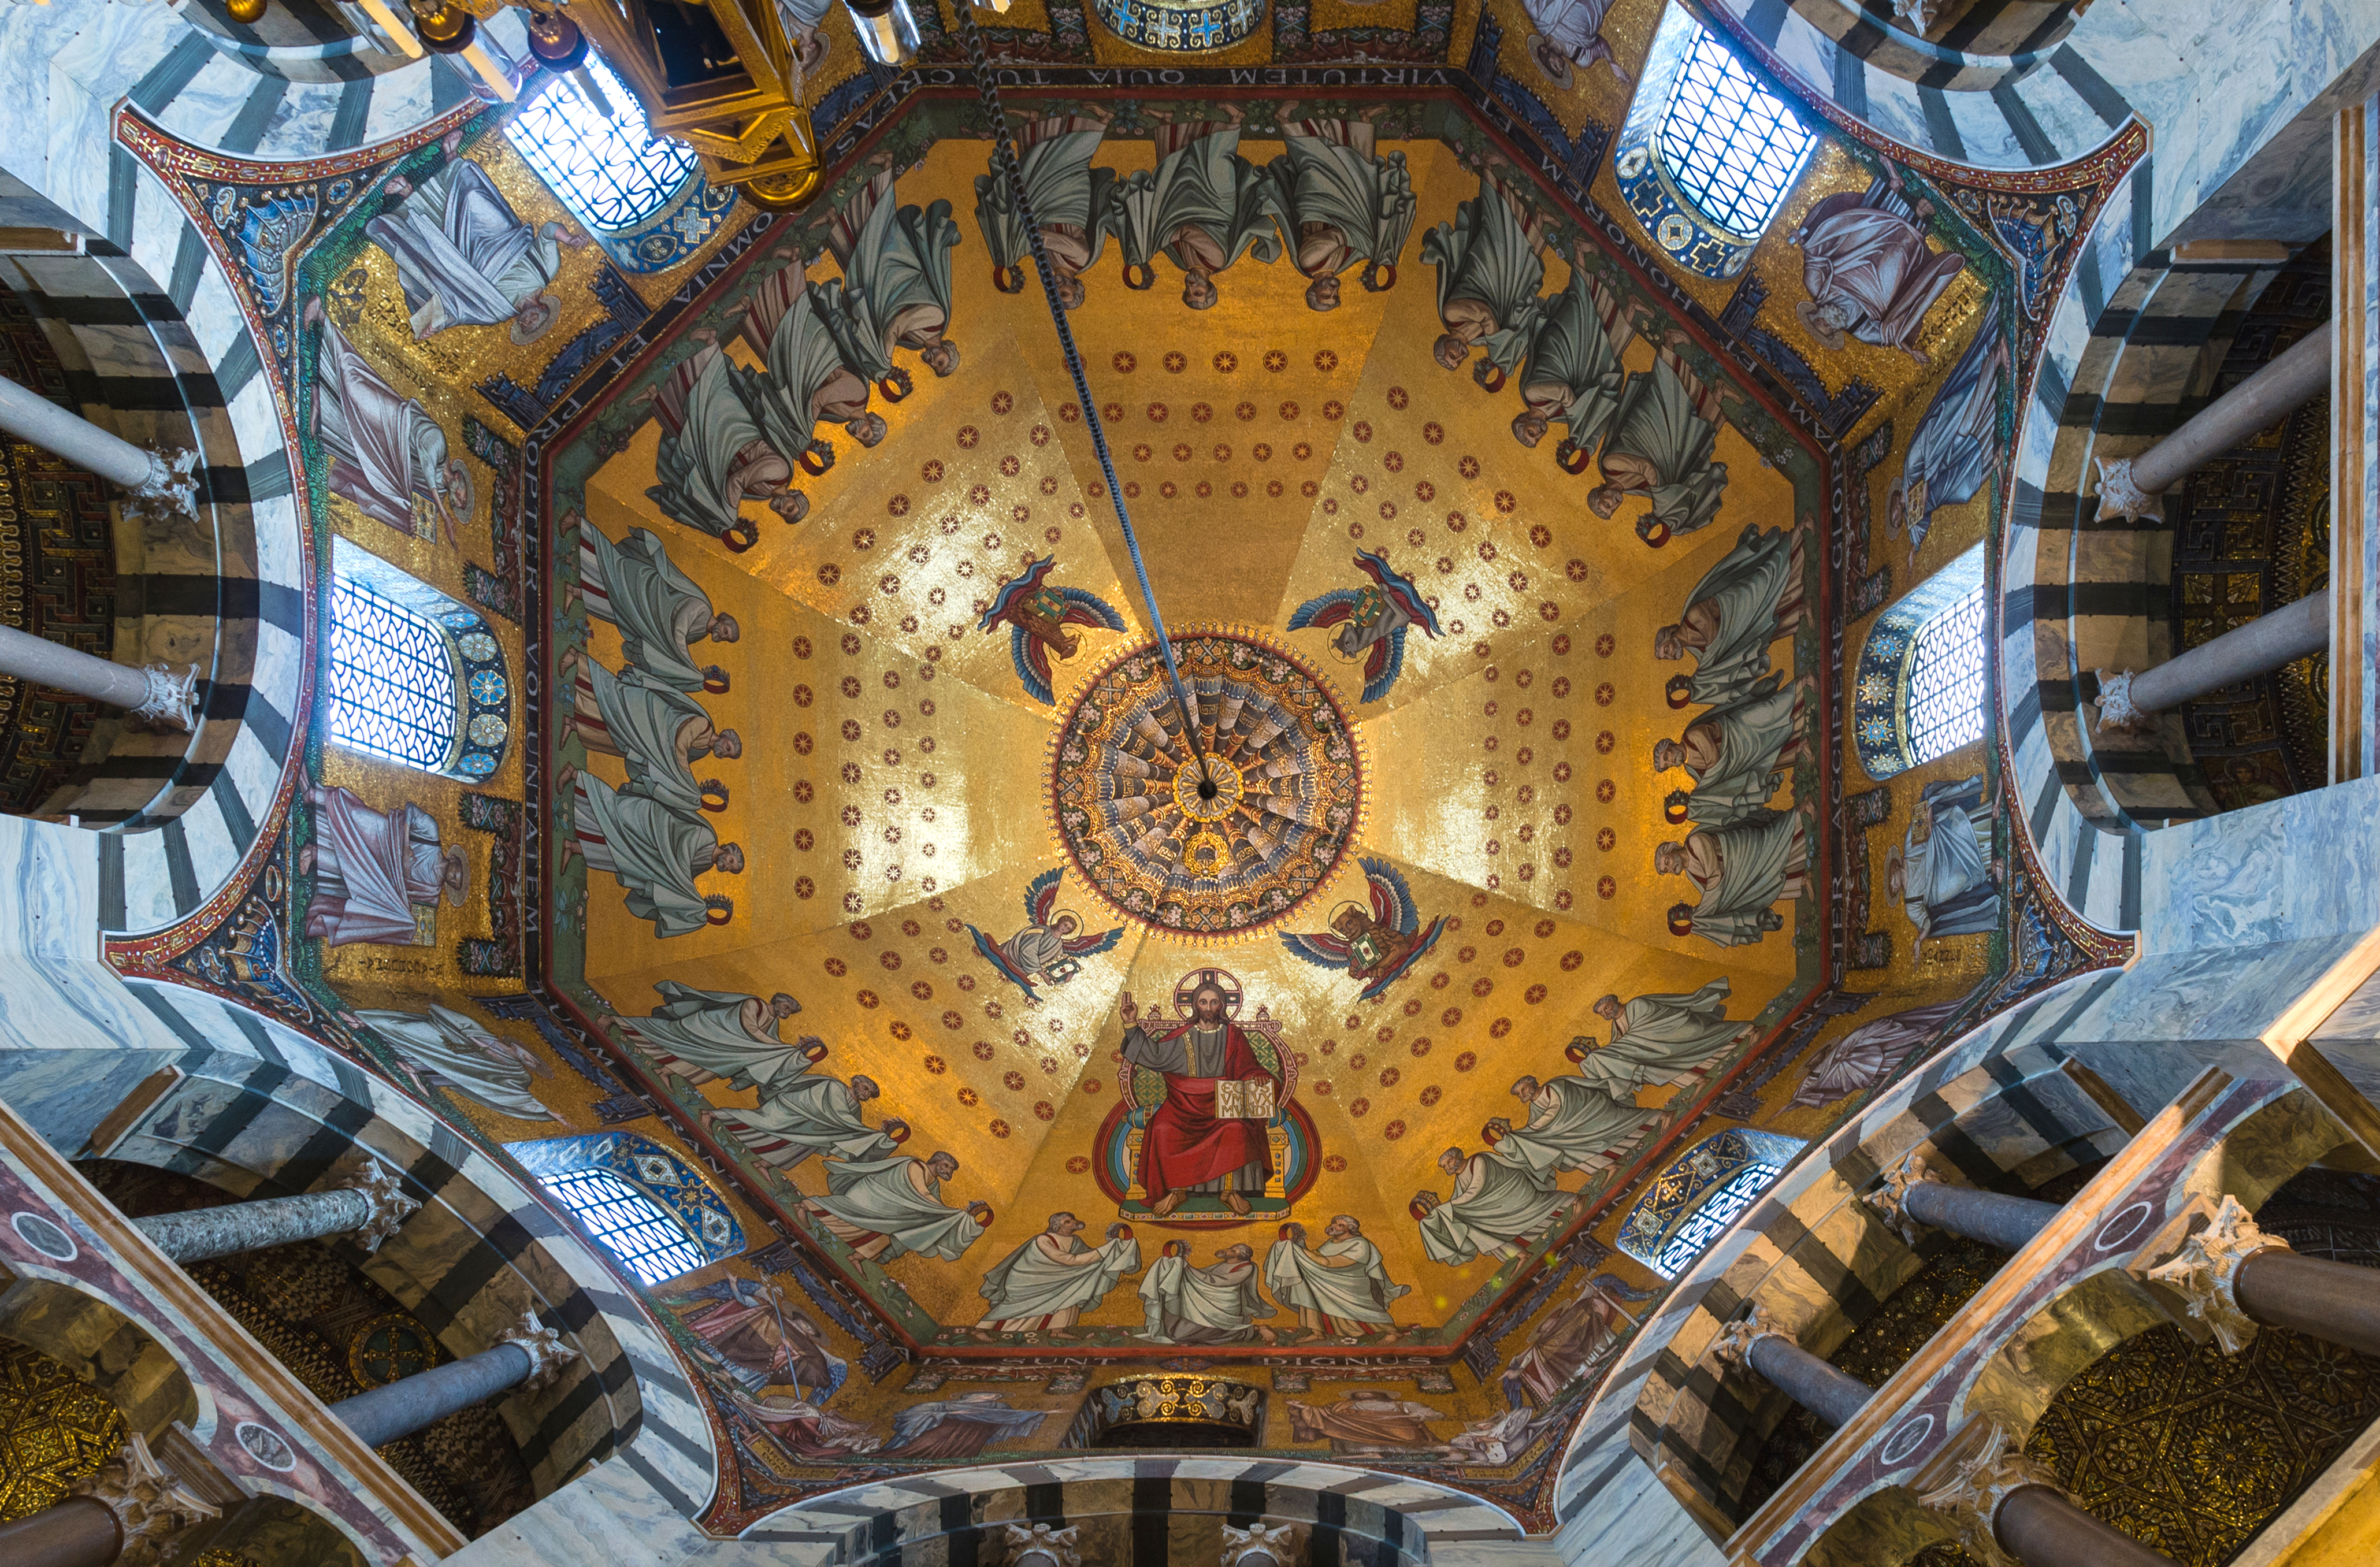 Main mosaic ceiling, Aachen Cathedral, Germany